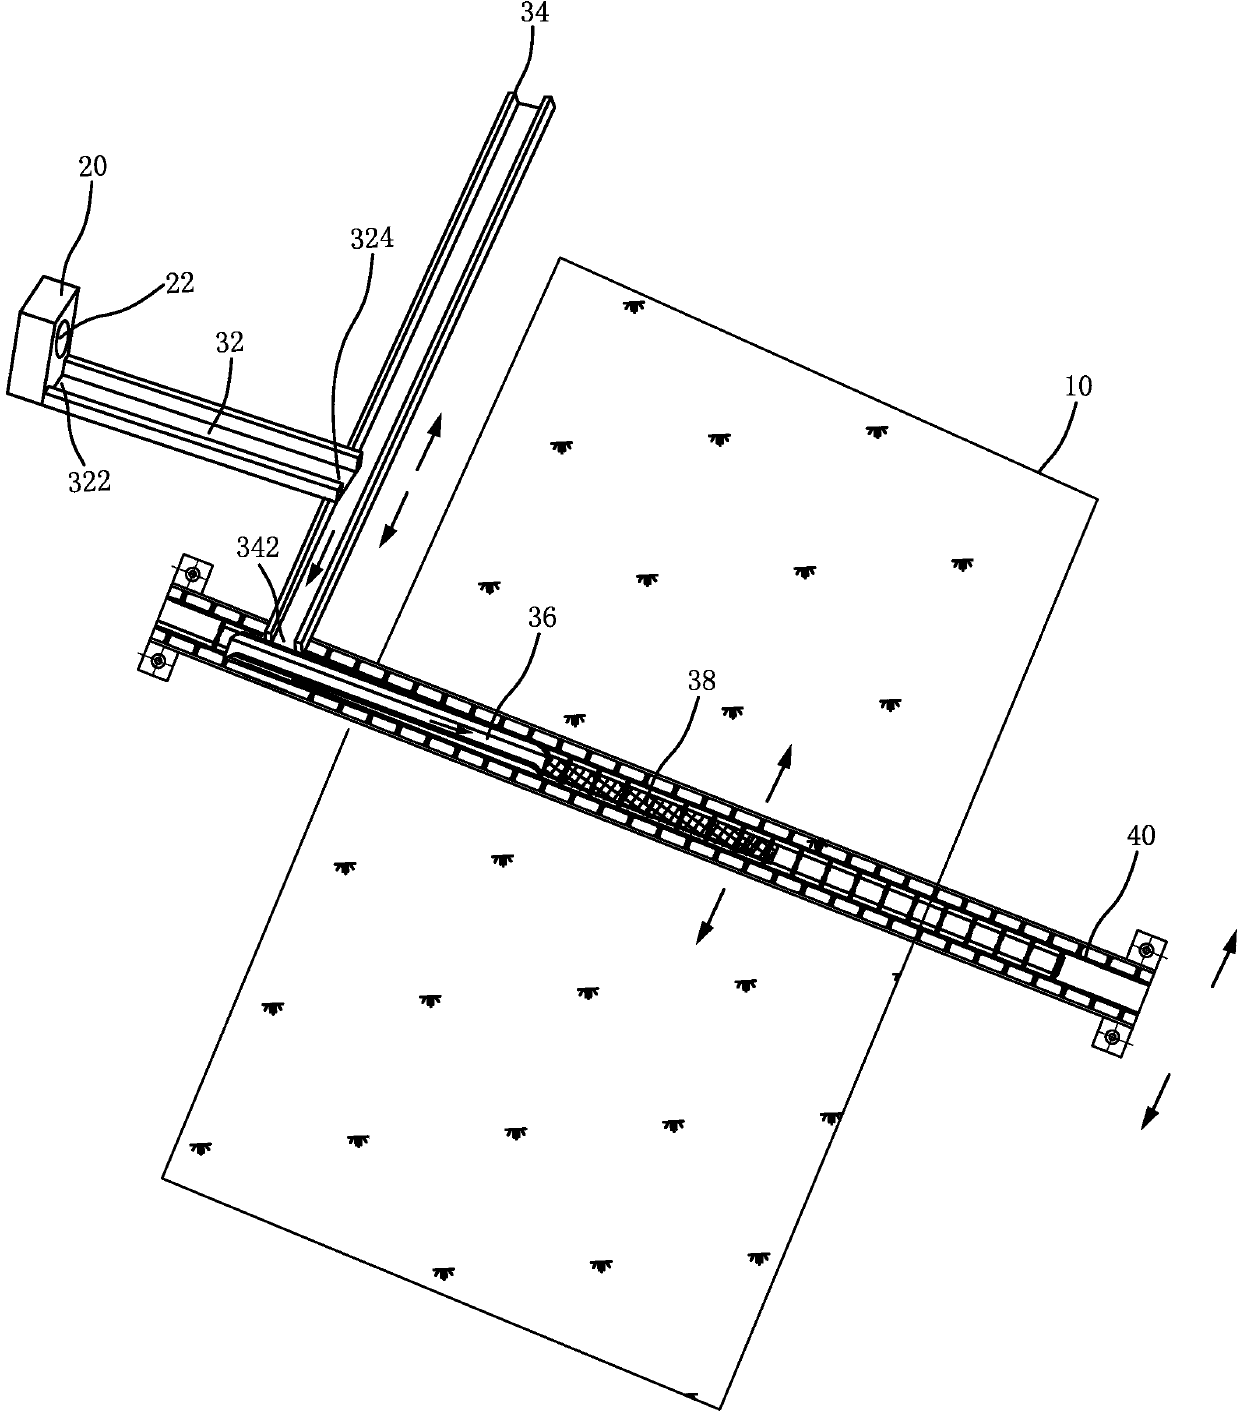 A concrete distribution and conveying system